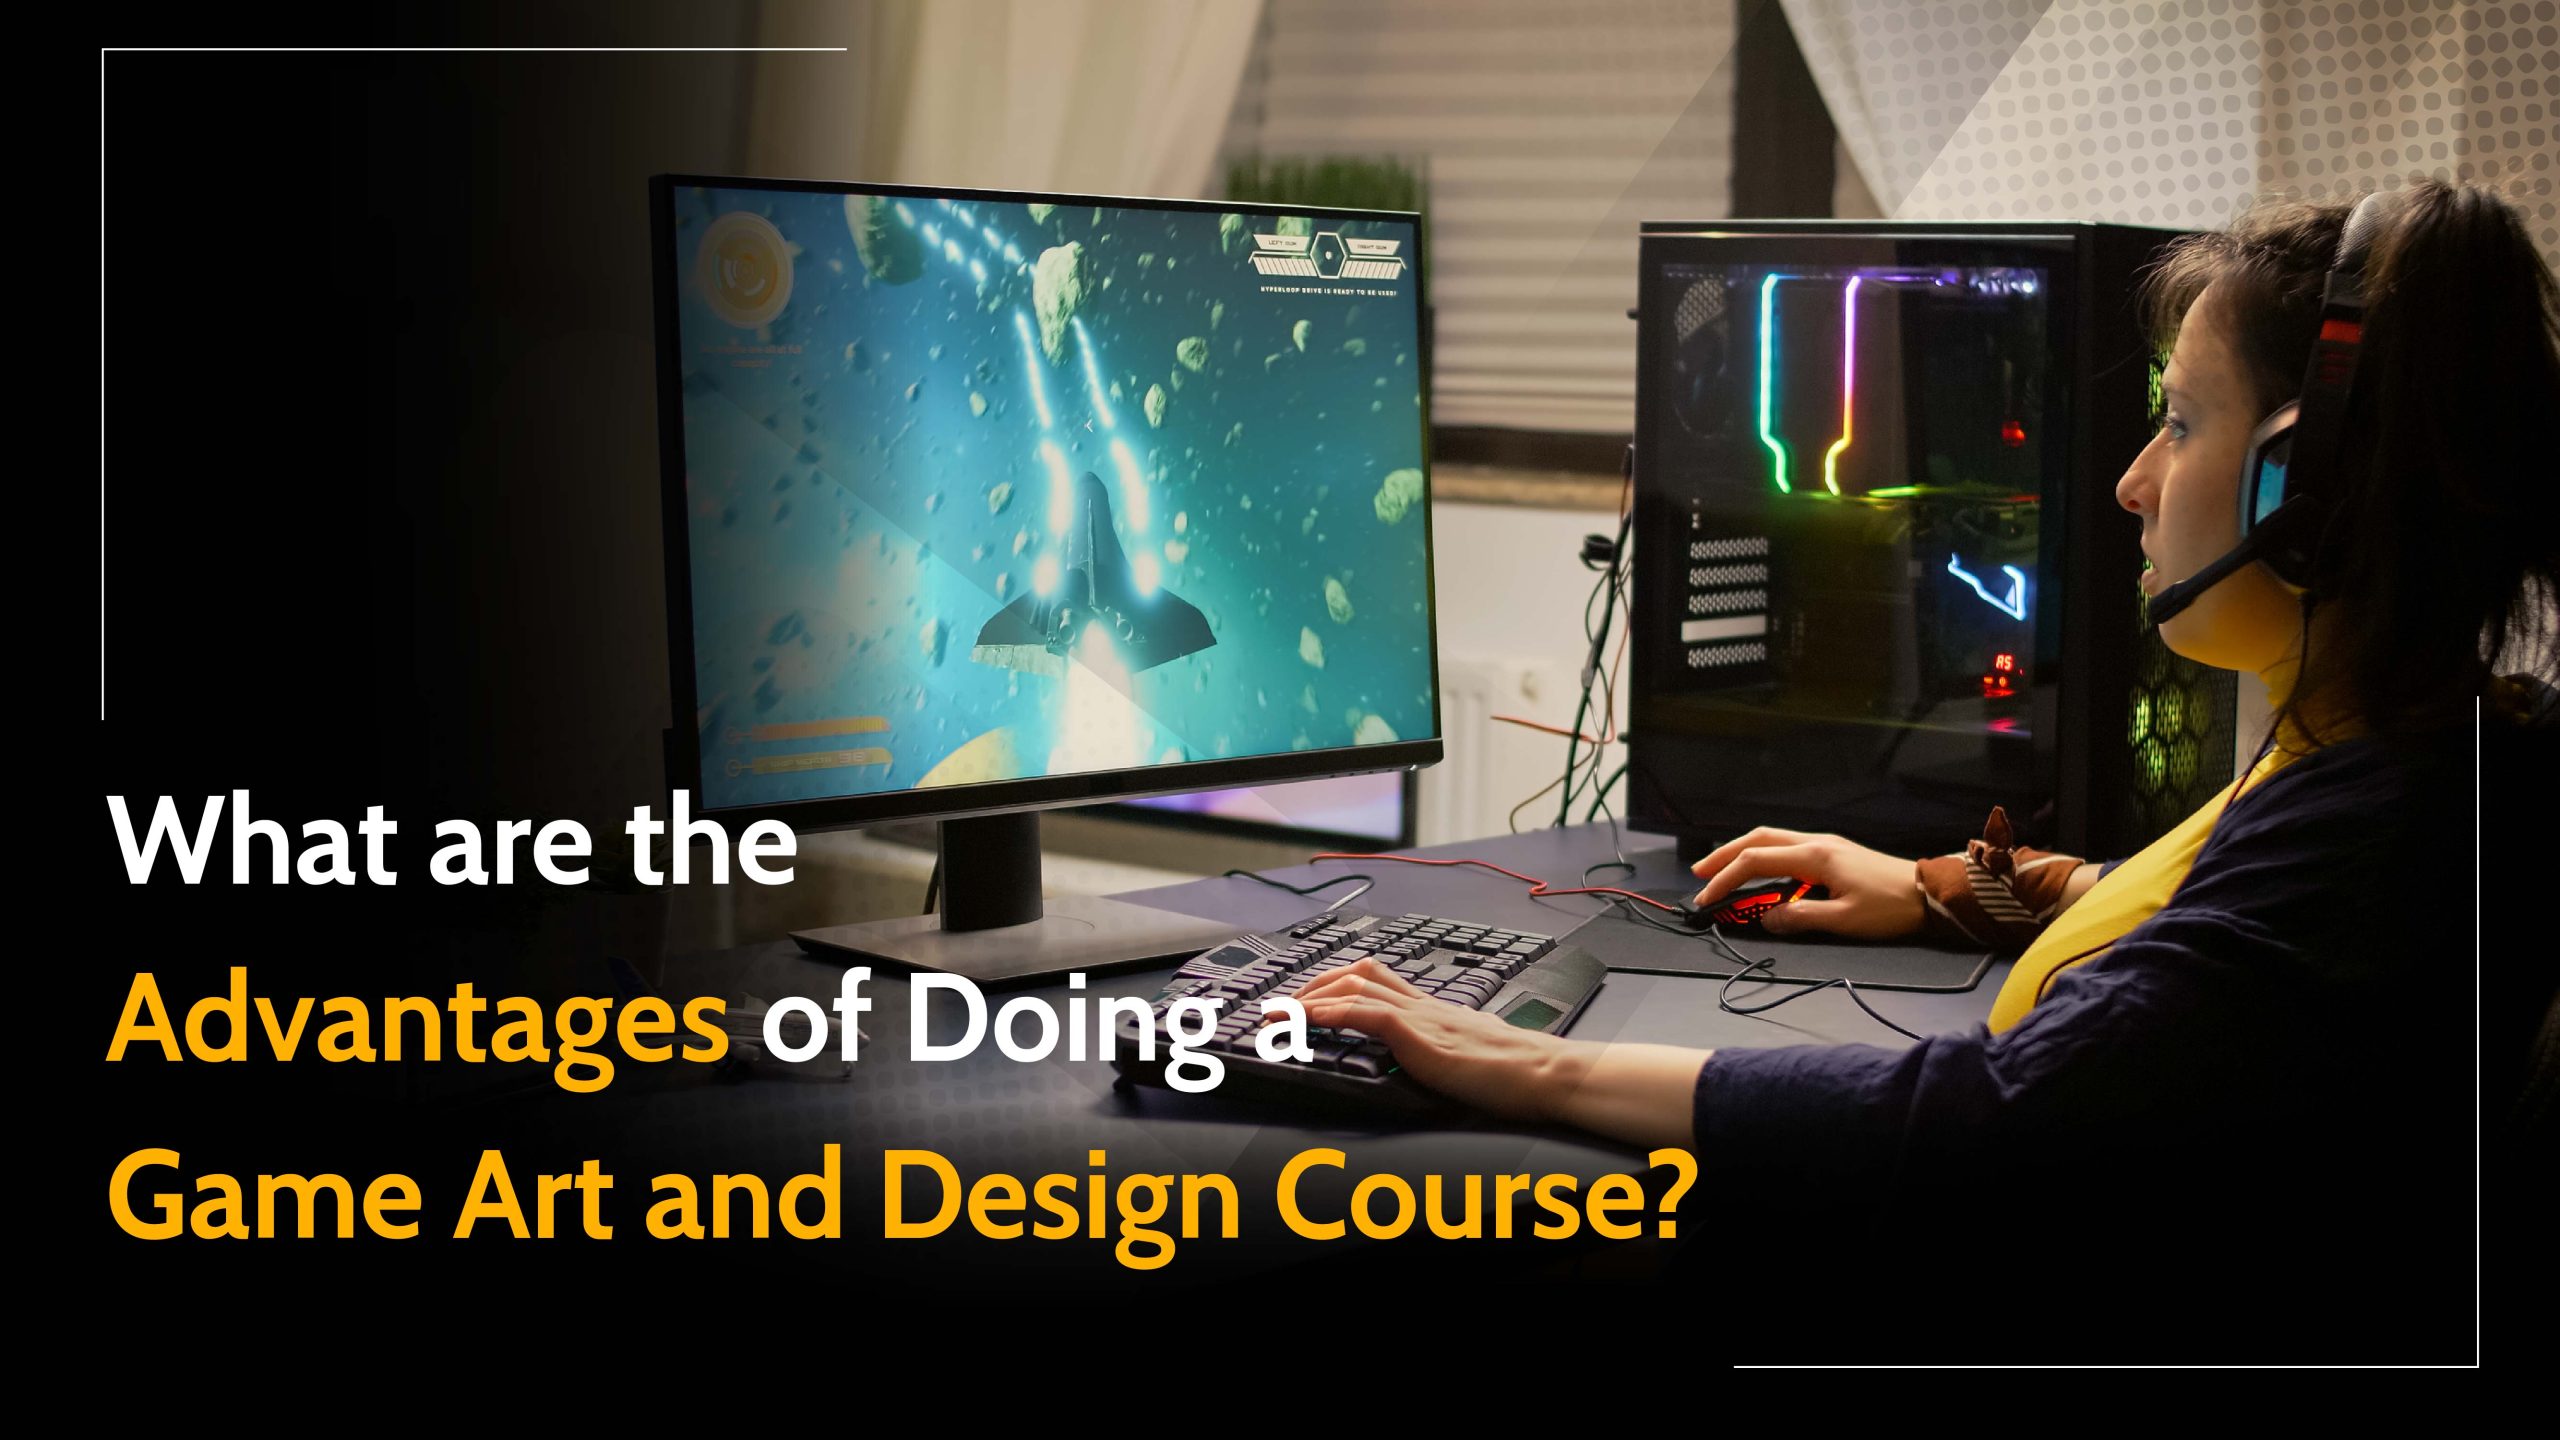 Game Art and Design Course